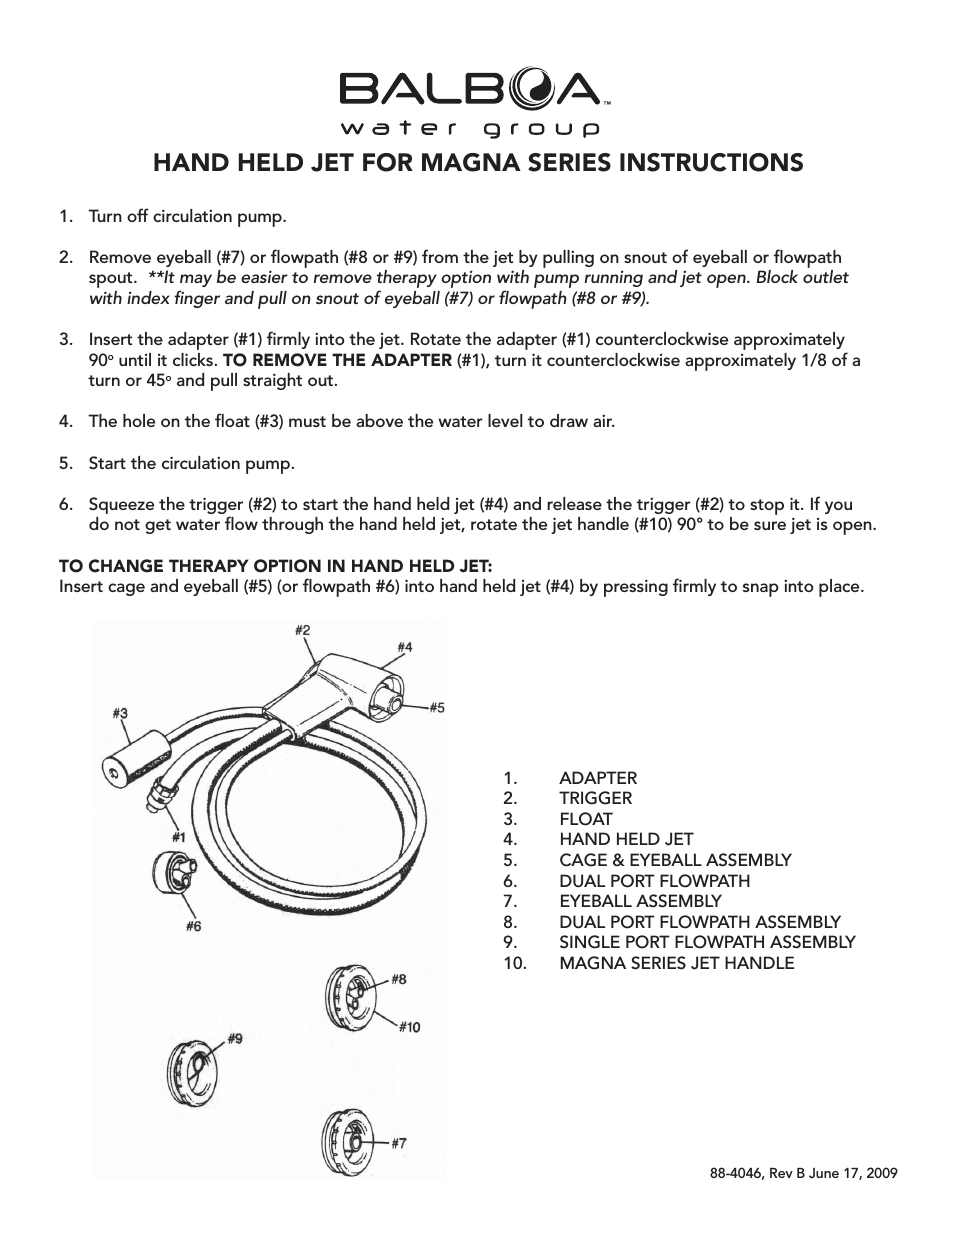 Hand Held Jet For Magna Series